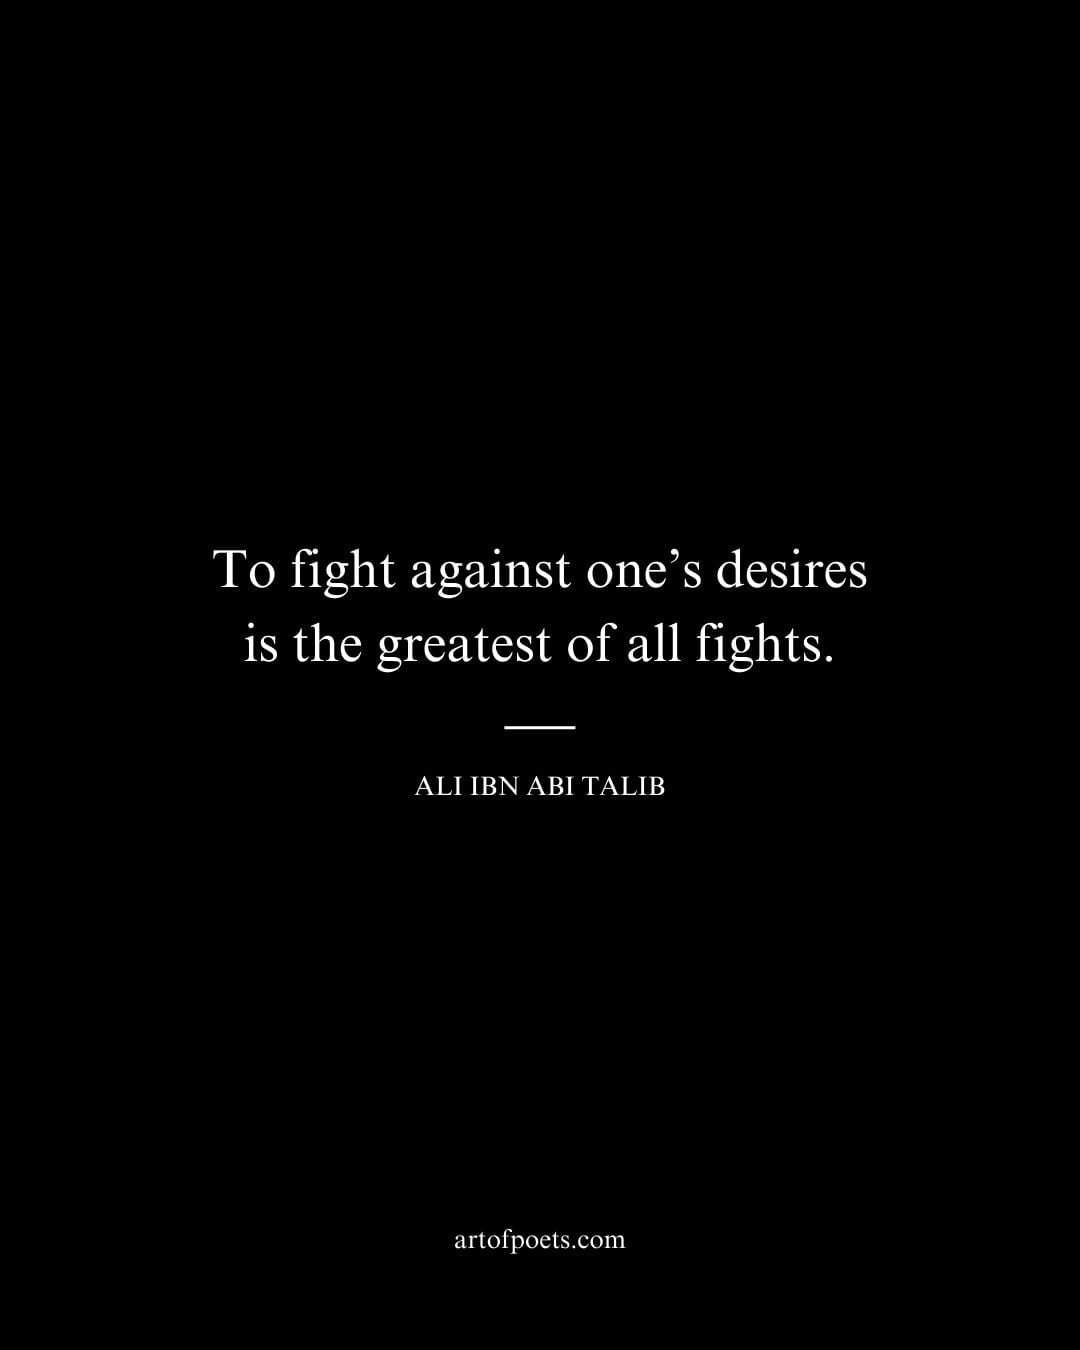 To fight against ones desires is the greatest of all fights